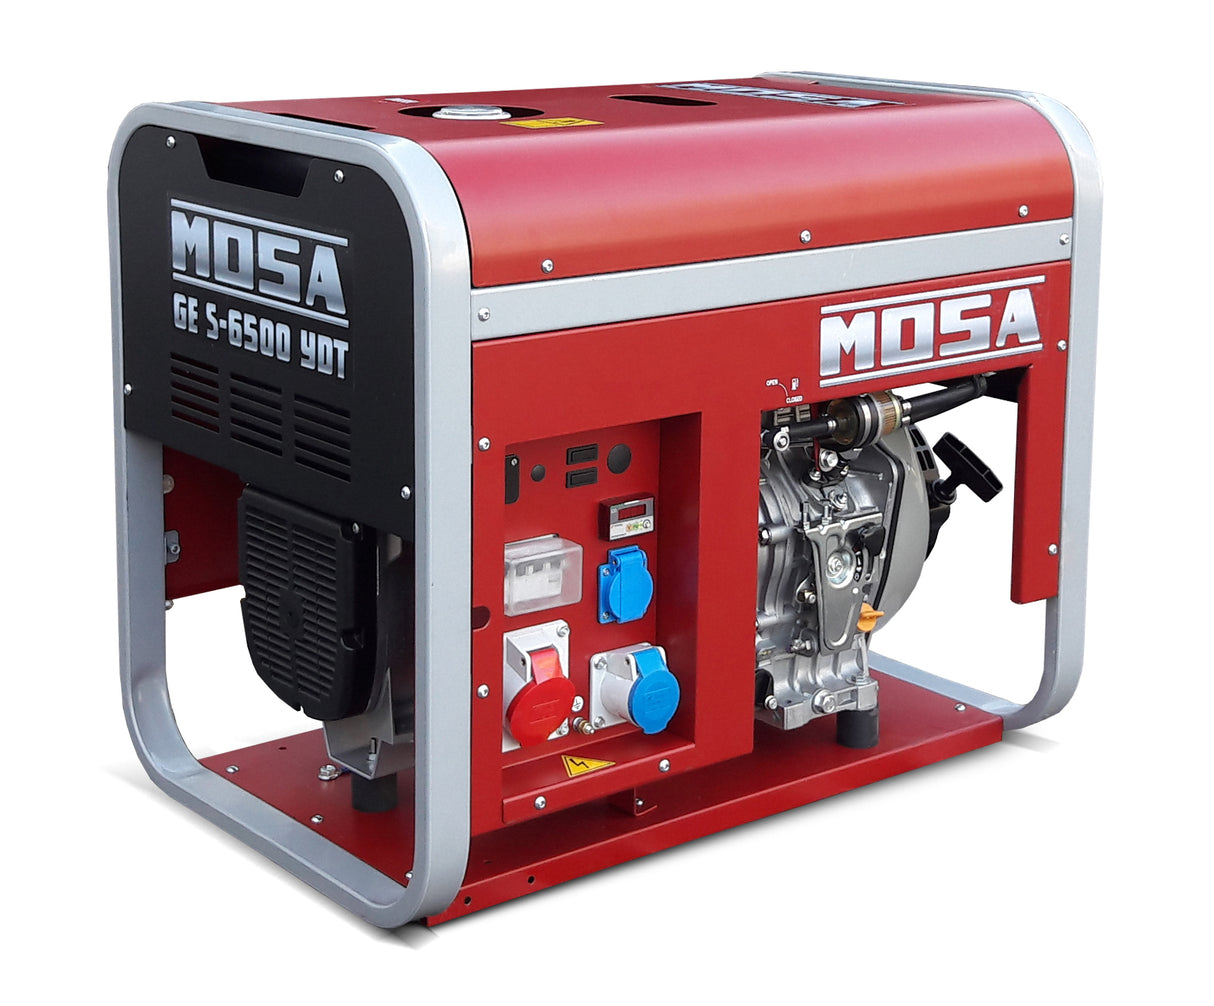 Portable power generator MOSA GES 6500 YDT